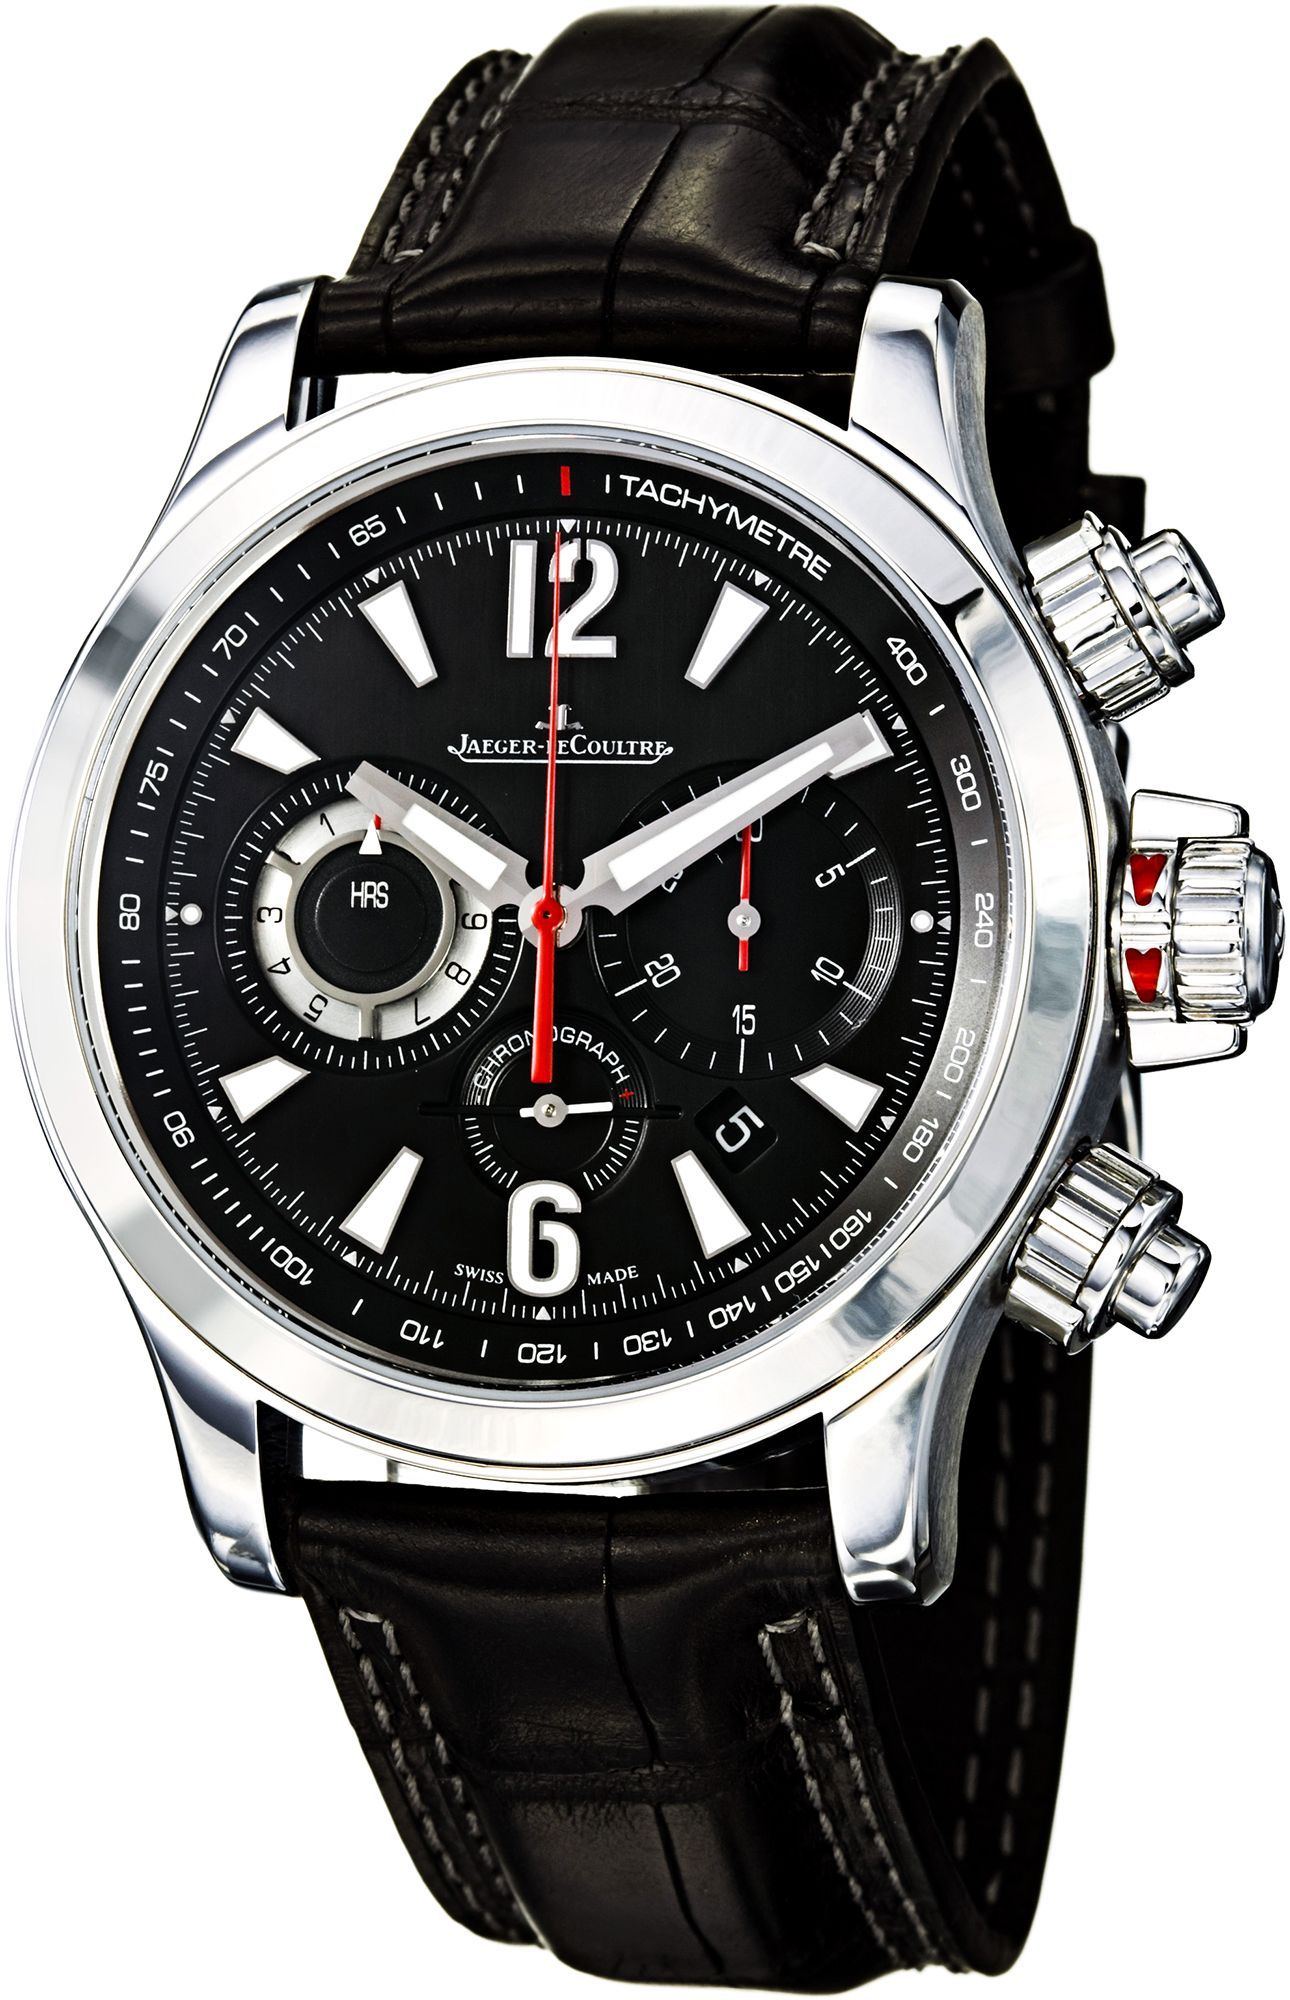 Jaeger-LeCoultre Master Compressor Chronograph 2 41.5 mm Watch in Black Dial For Men - 1